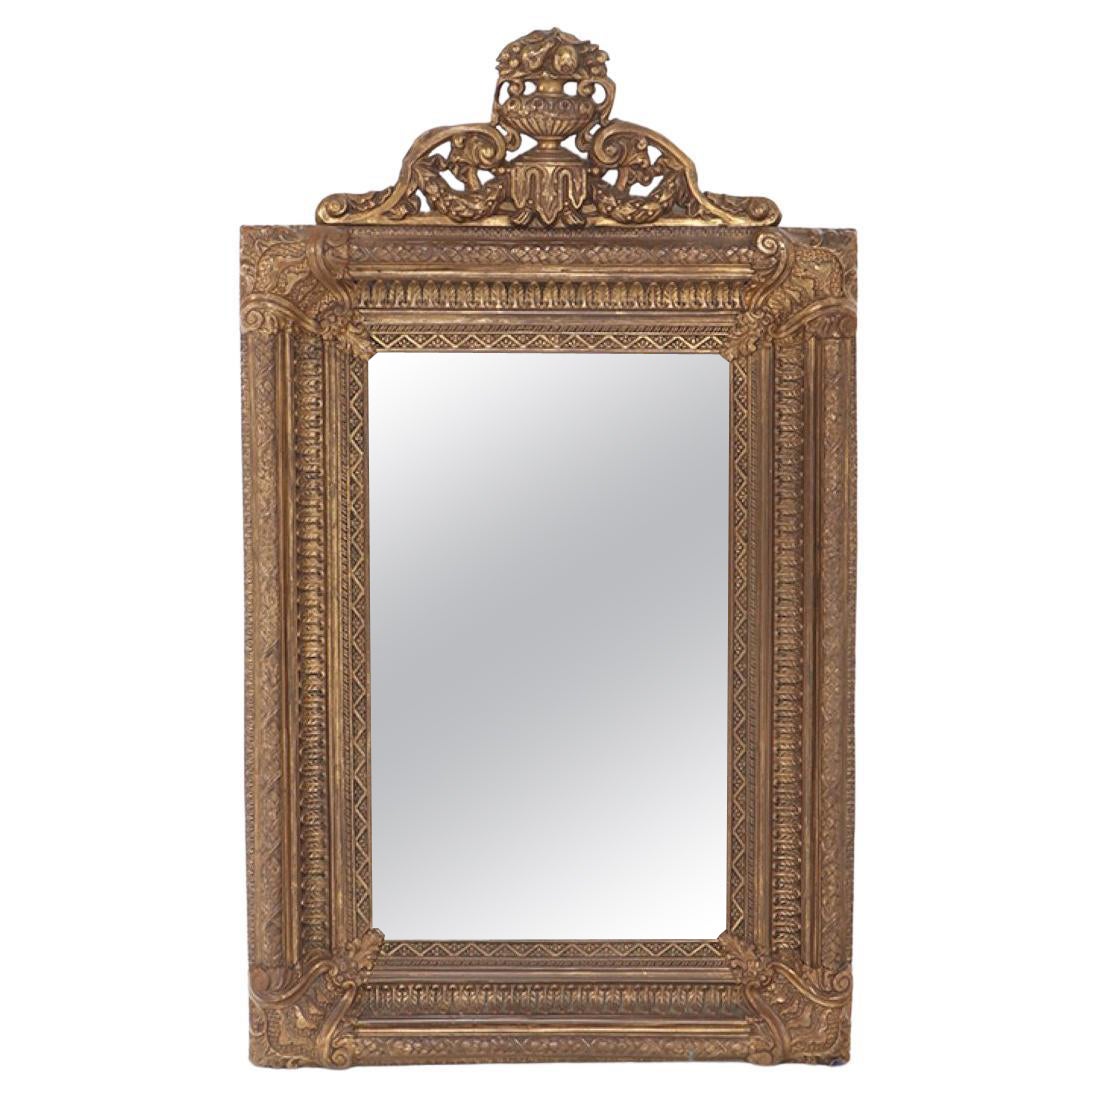 A Dutch style brass repouse mirror circa 1880. Top crest is removeable